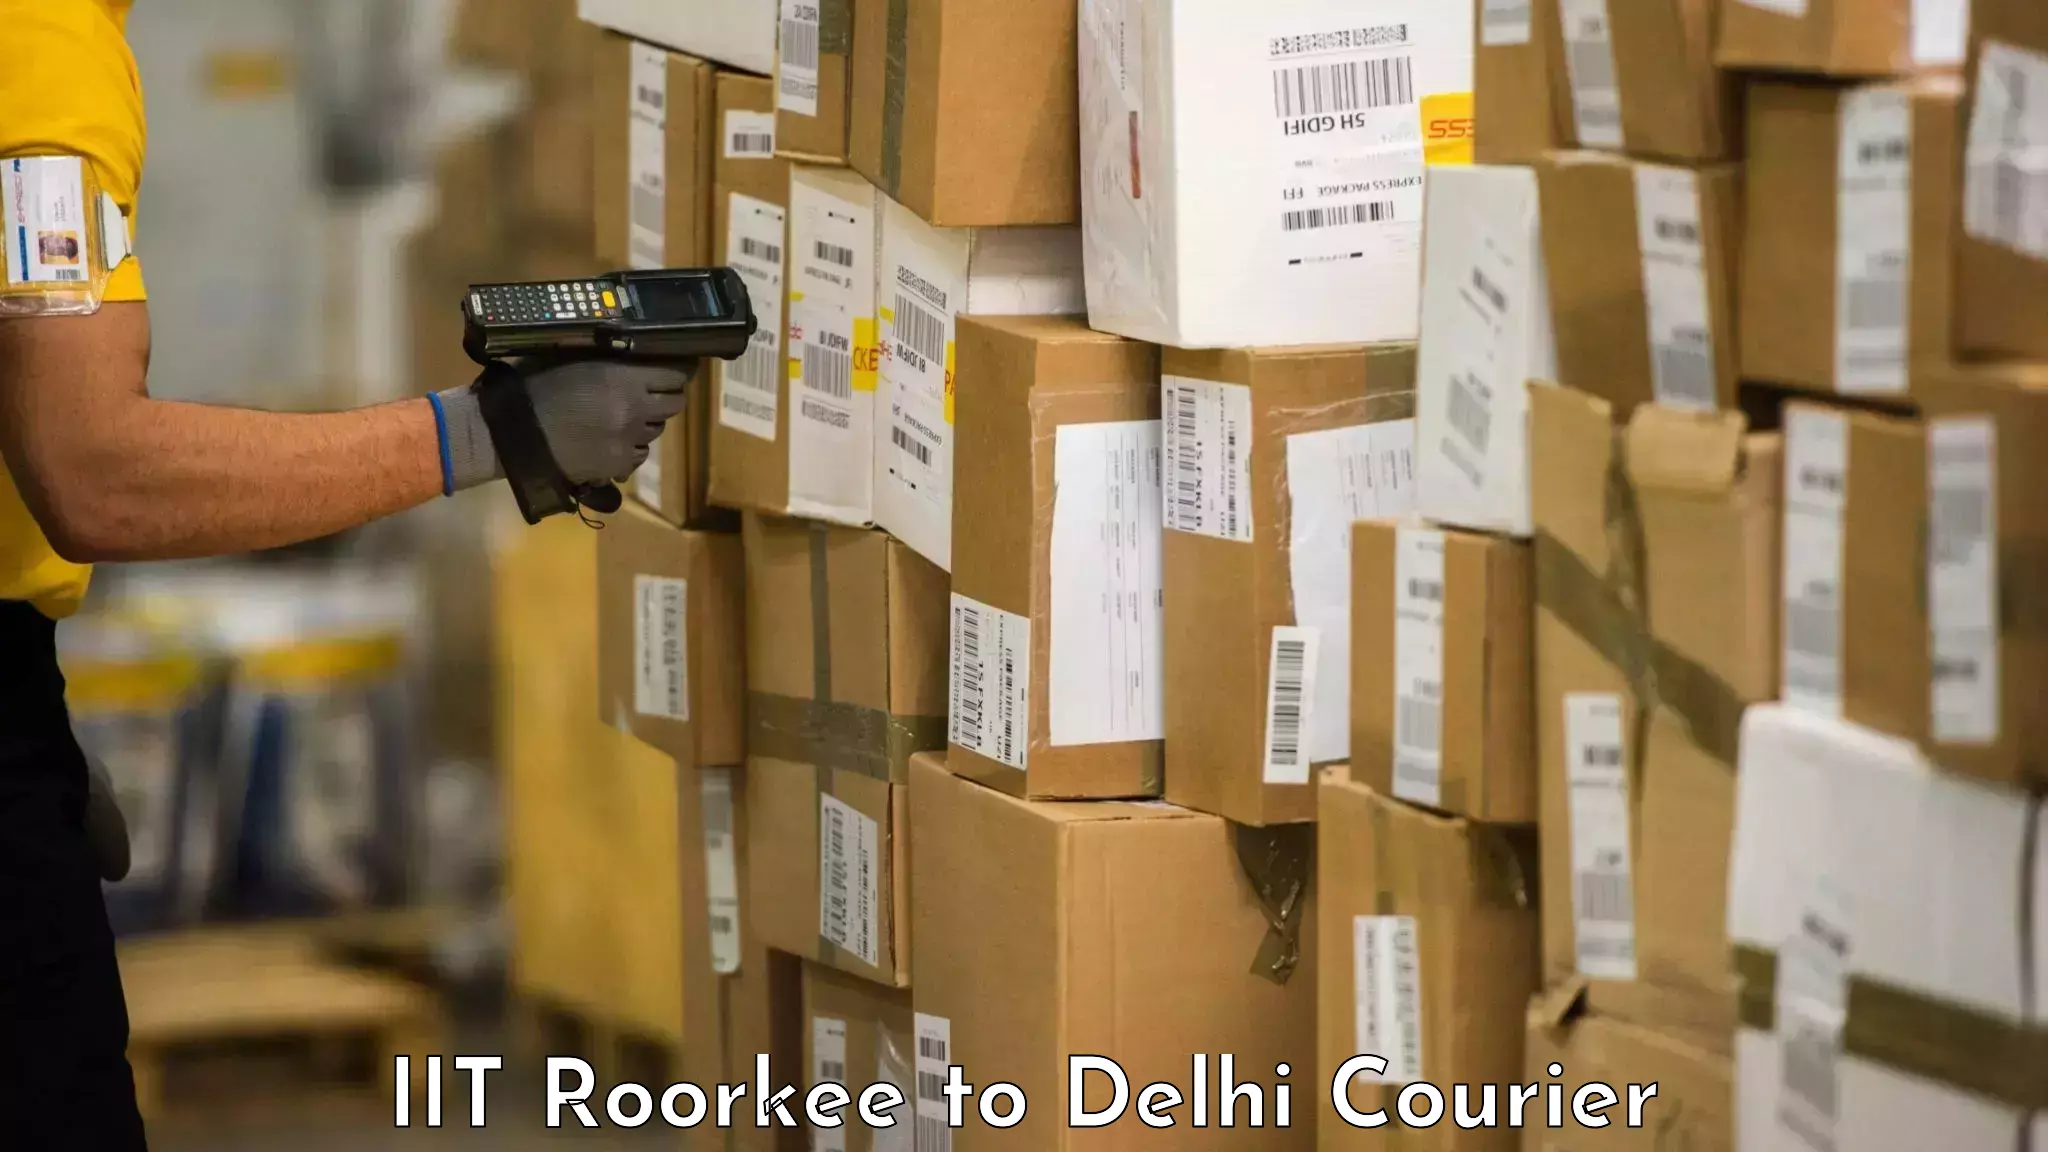 Luggage transport consulting IIT Roorkee to Lodhi Road